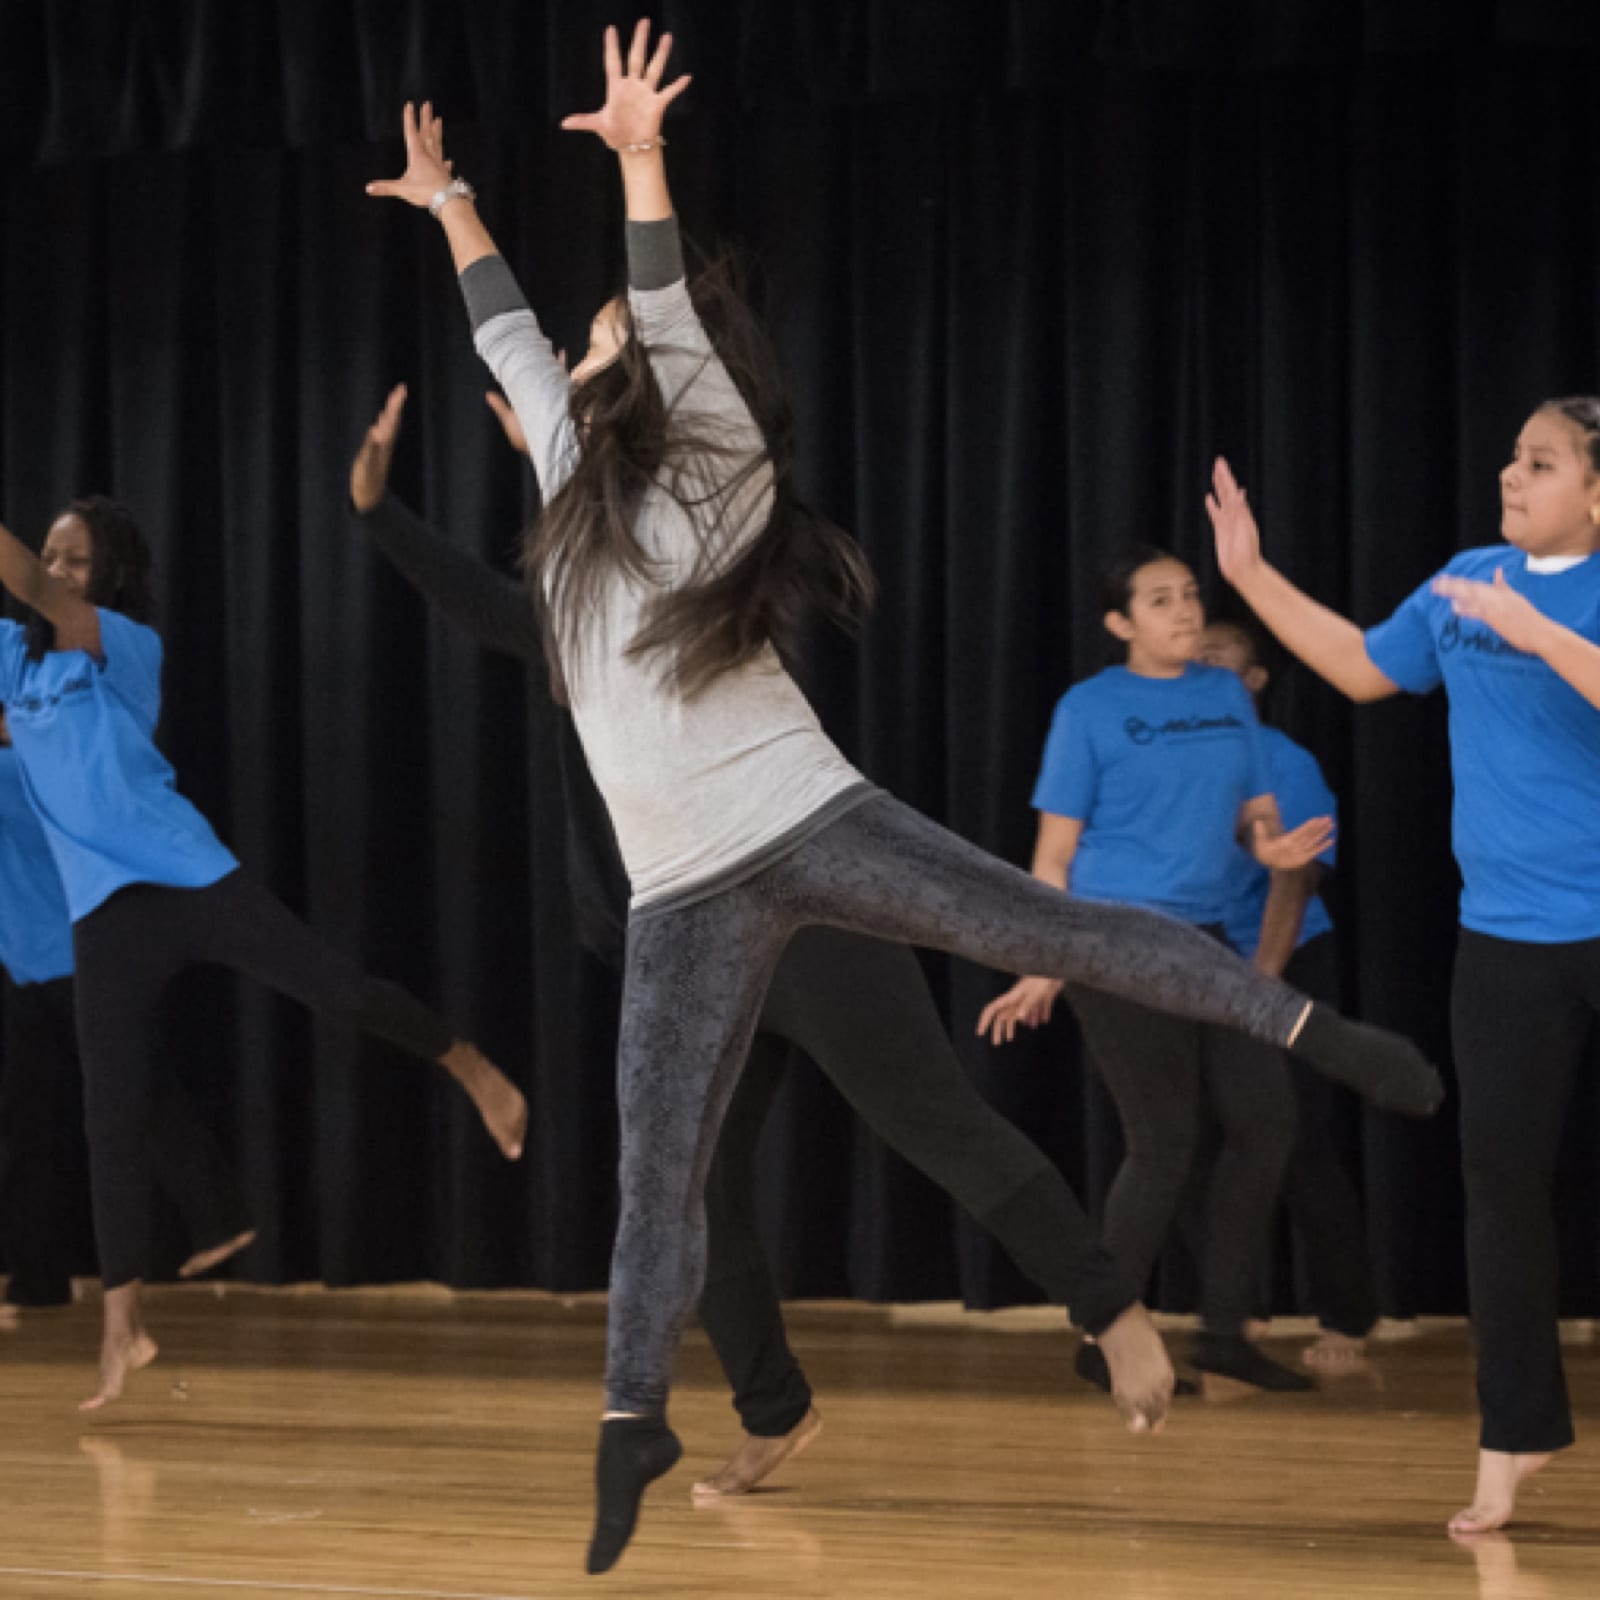 Teaching artist models a leaping dance move for students, following behind.